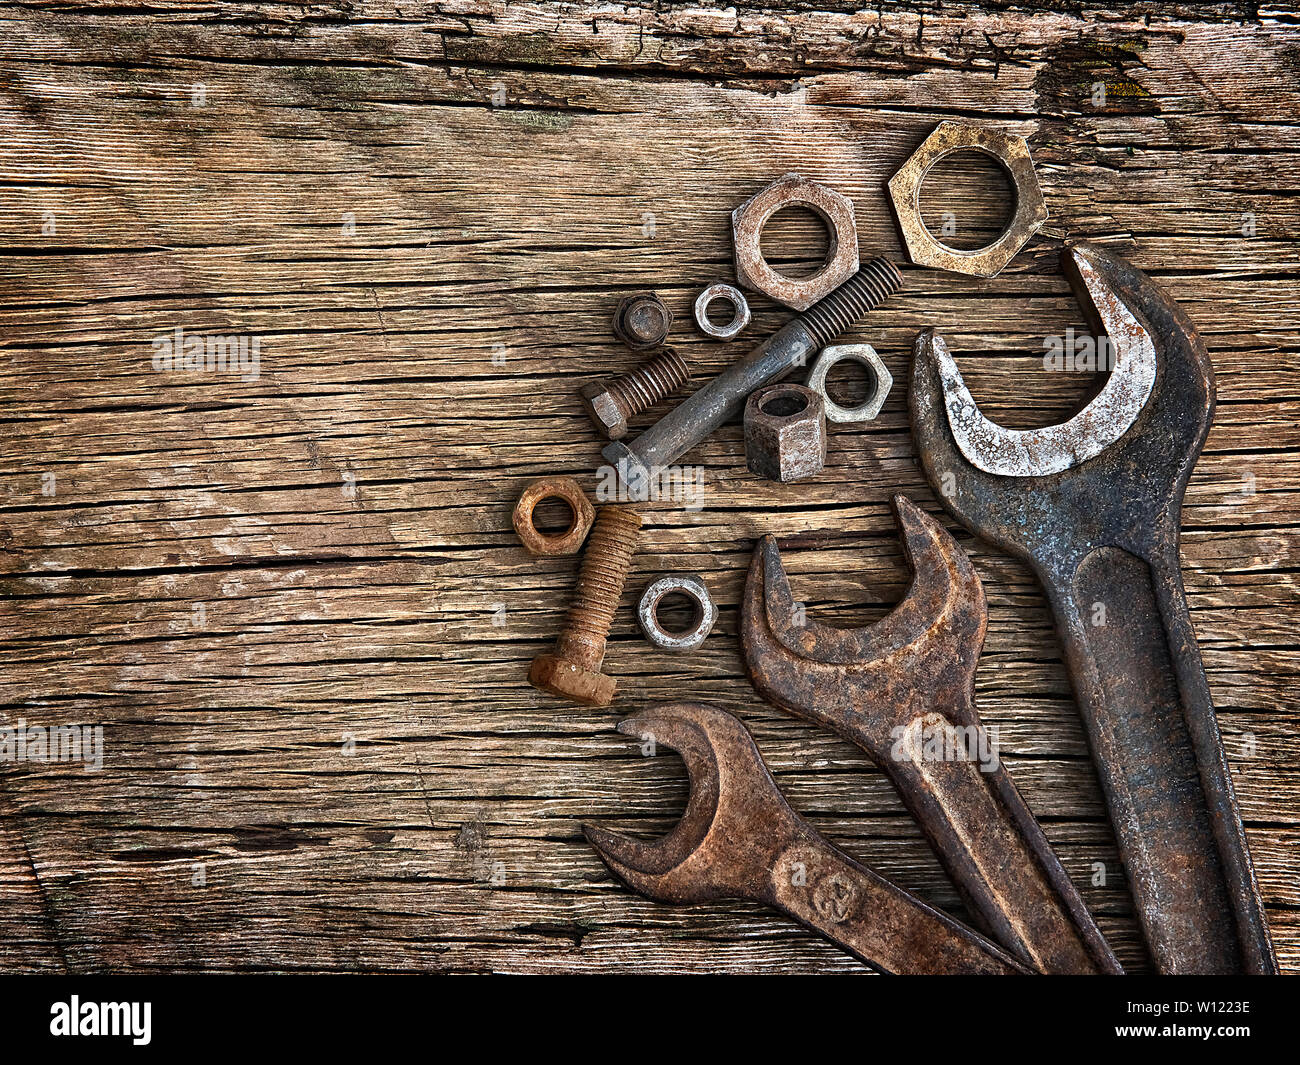 Old wrenches on the nuts and bolts on a wooden grungy background Stock Photo